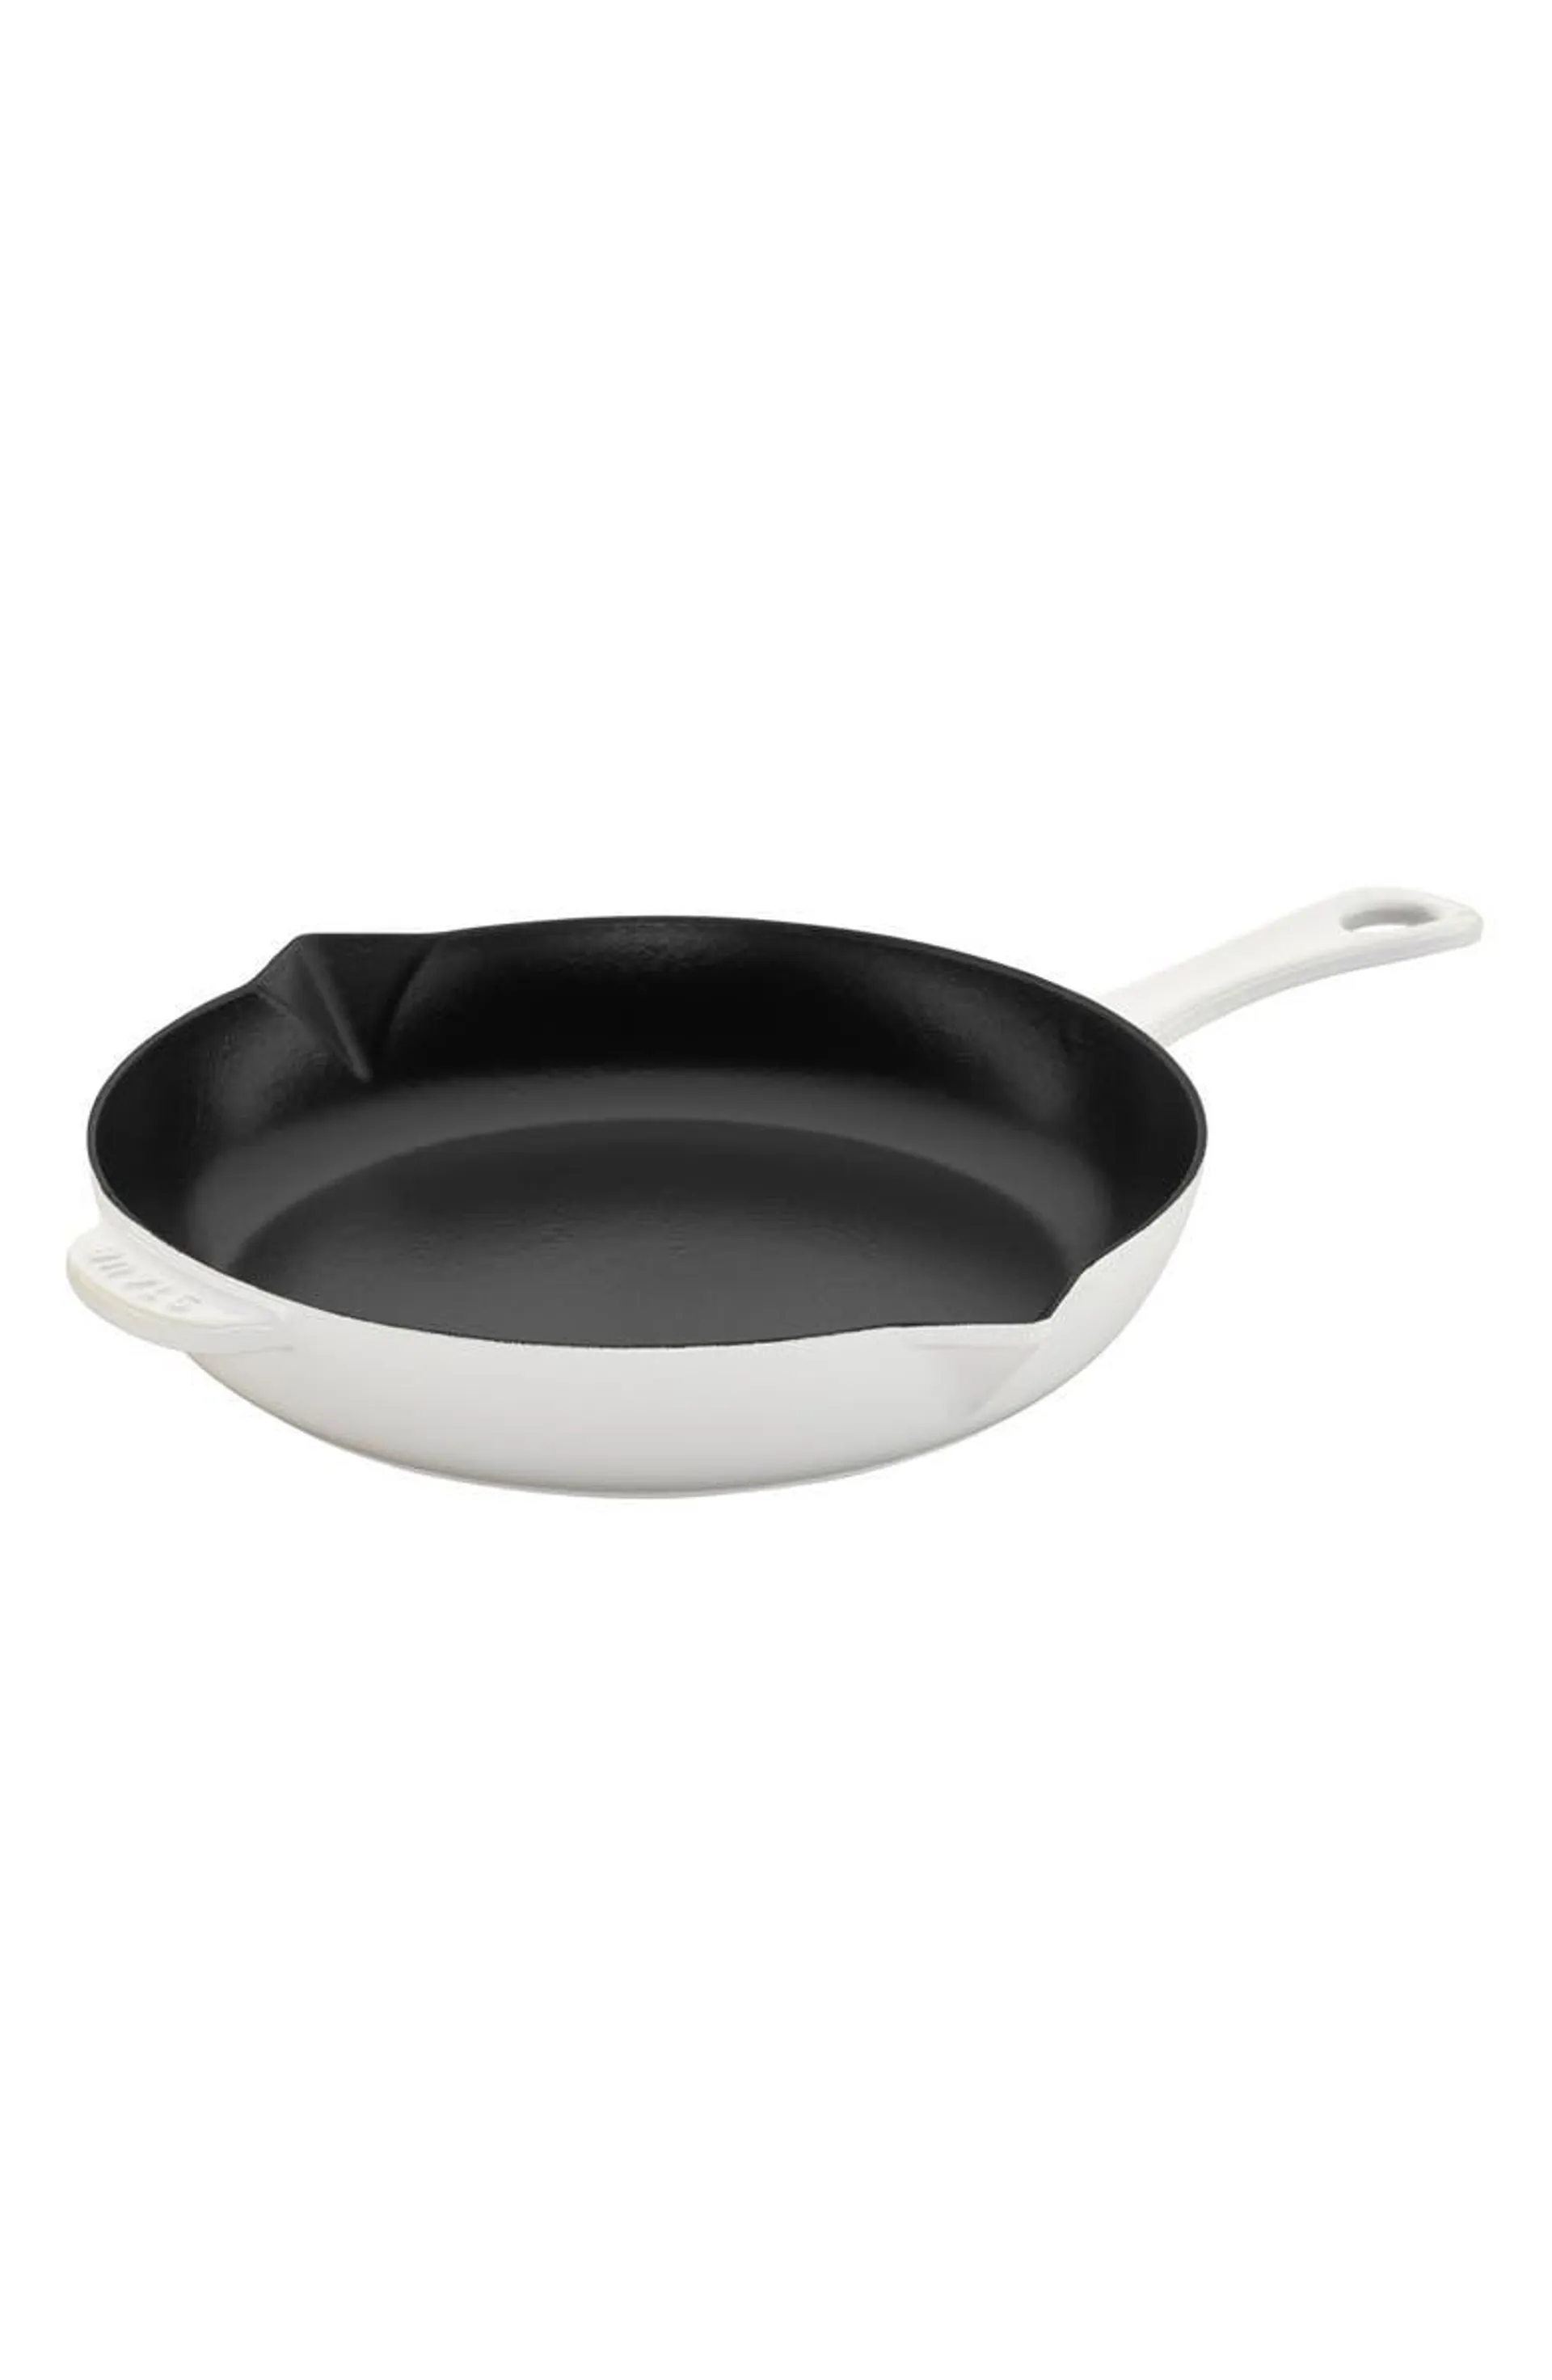 10-Inch Enameled Cast Iron Fry Pan